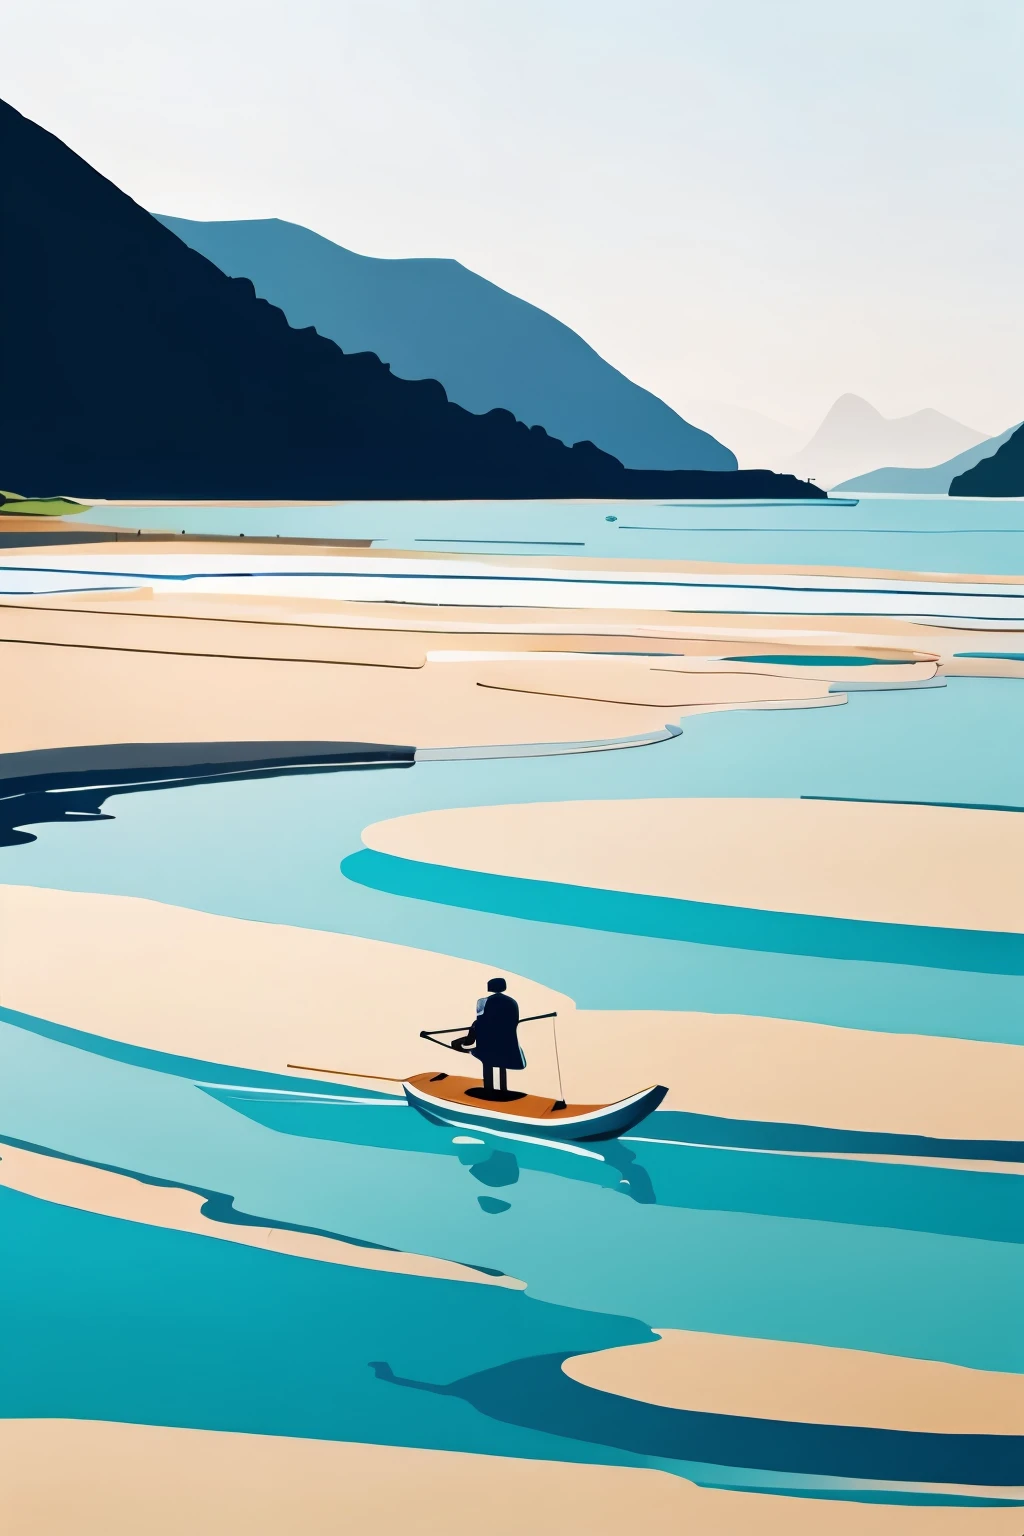 1 Man on the water，minimalist，illustration style，Colorful